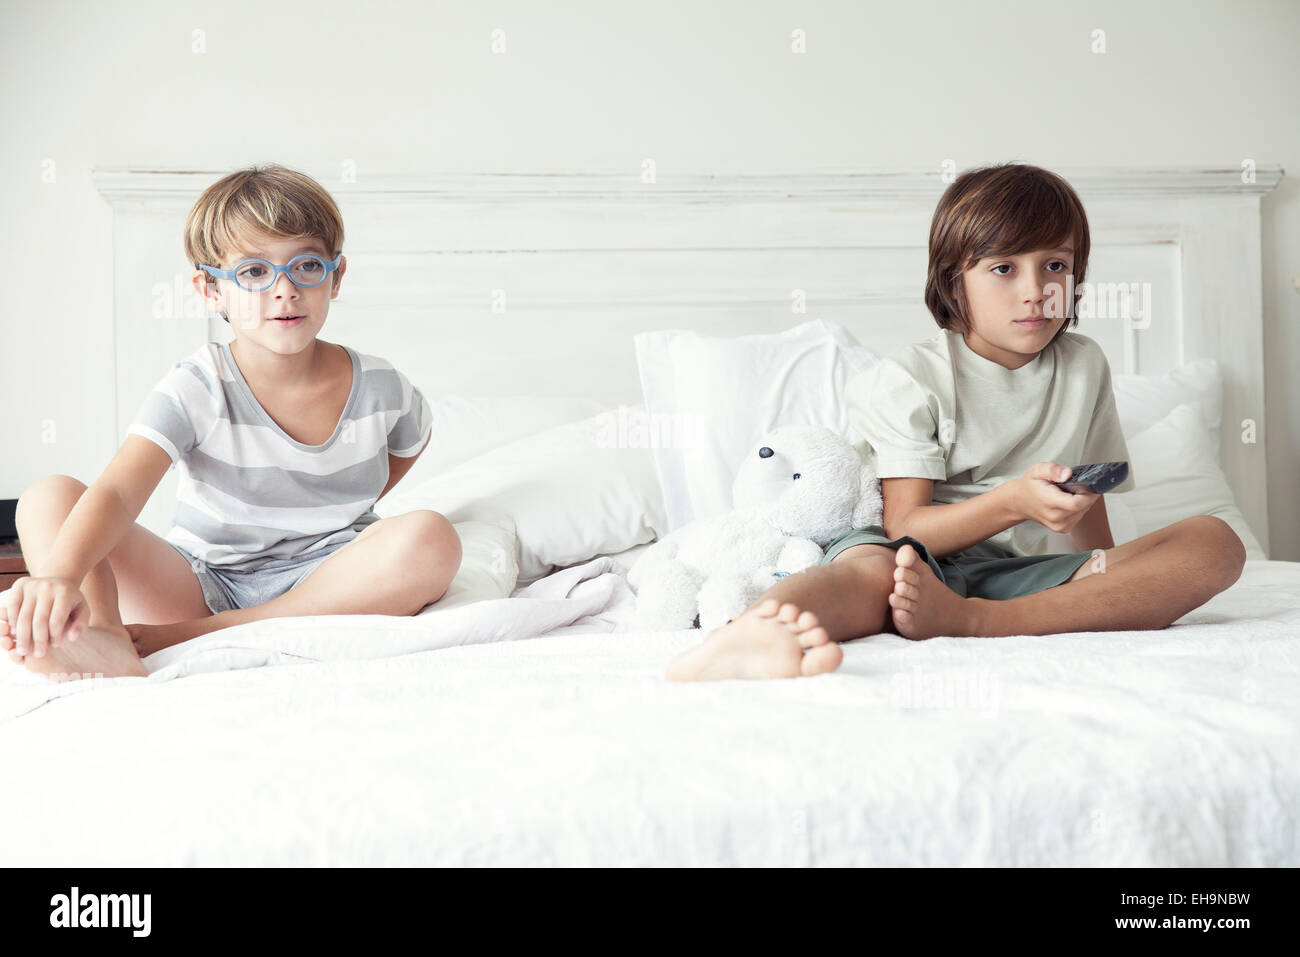 Boys watching tv on bed, portrait Stock Photo